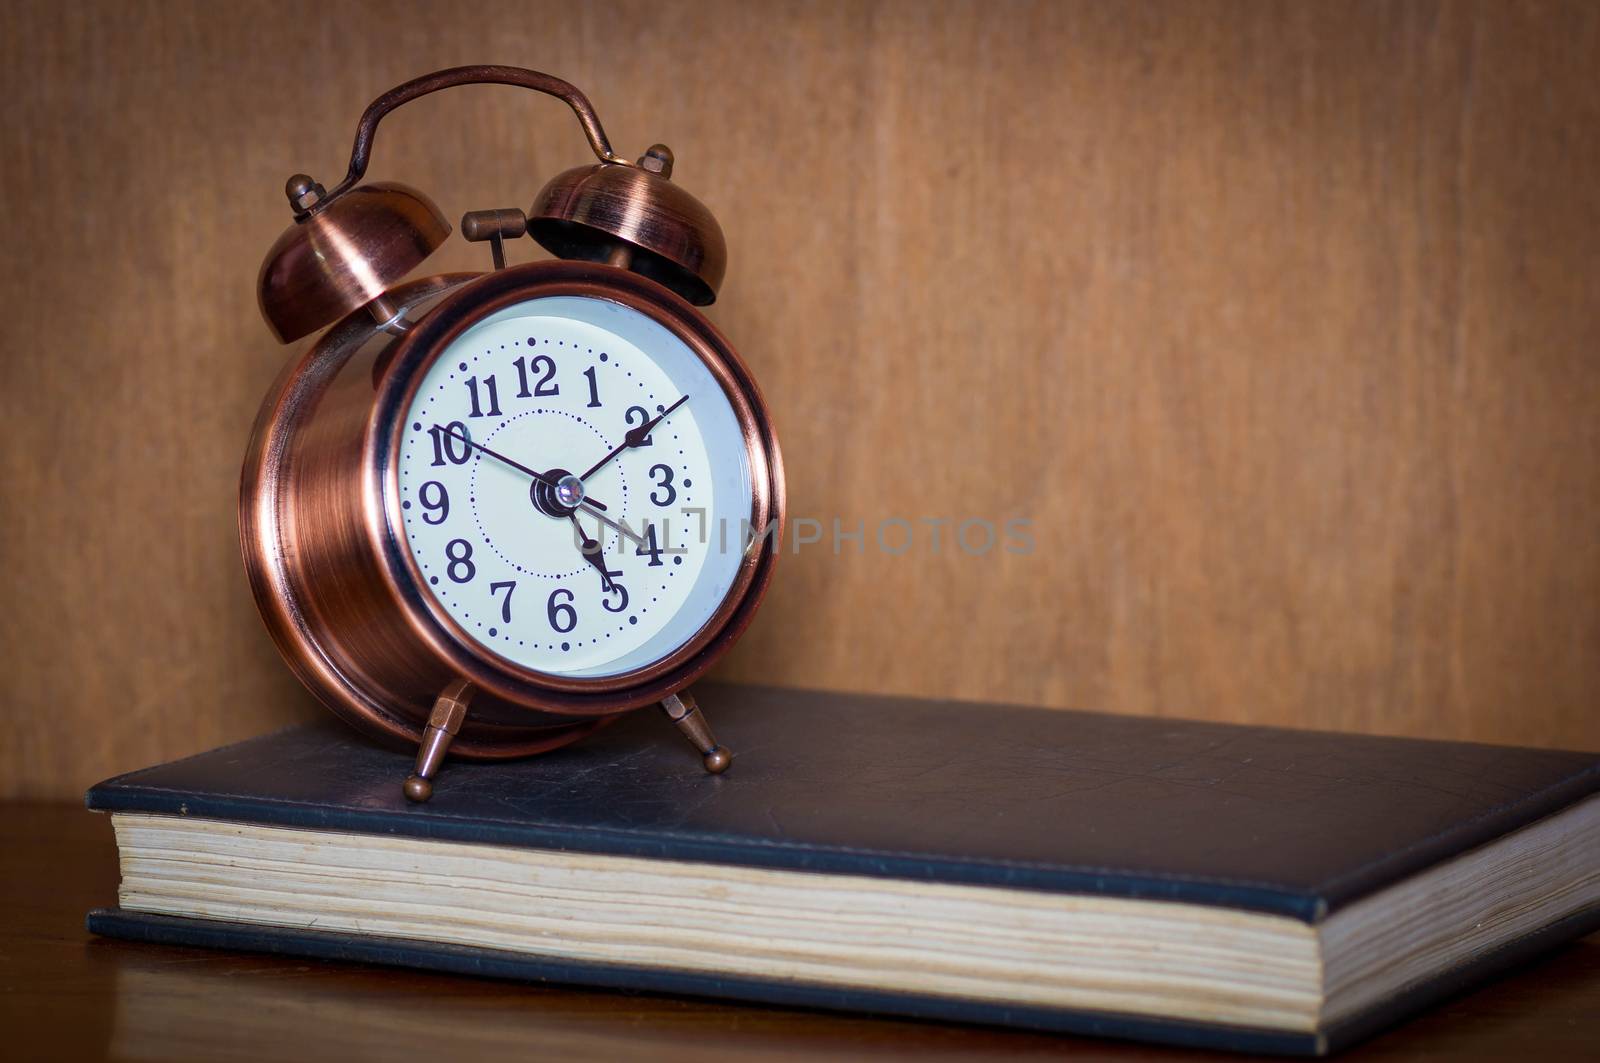 Alarm clock and book. by seksan44